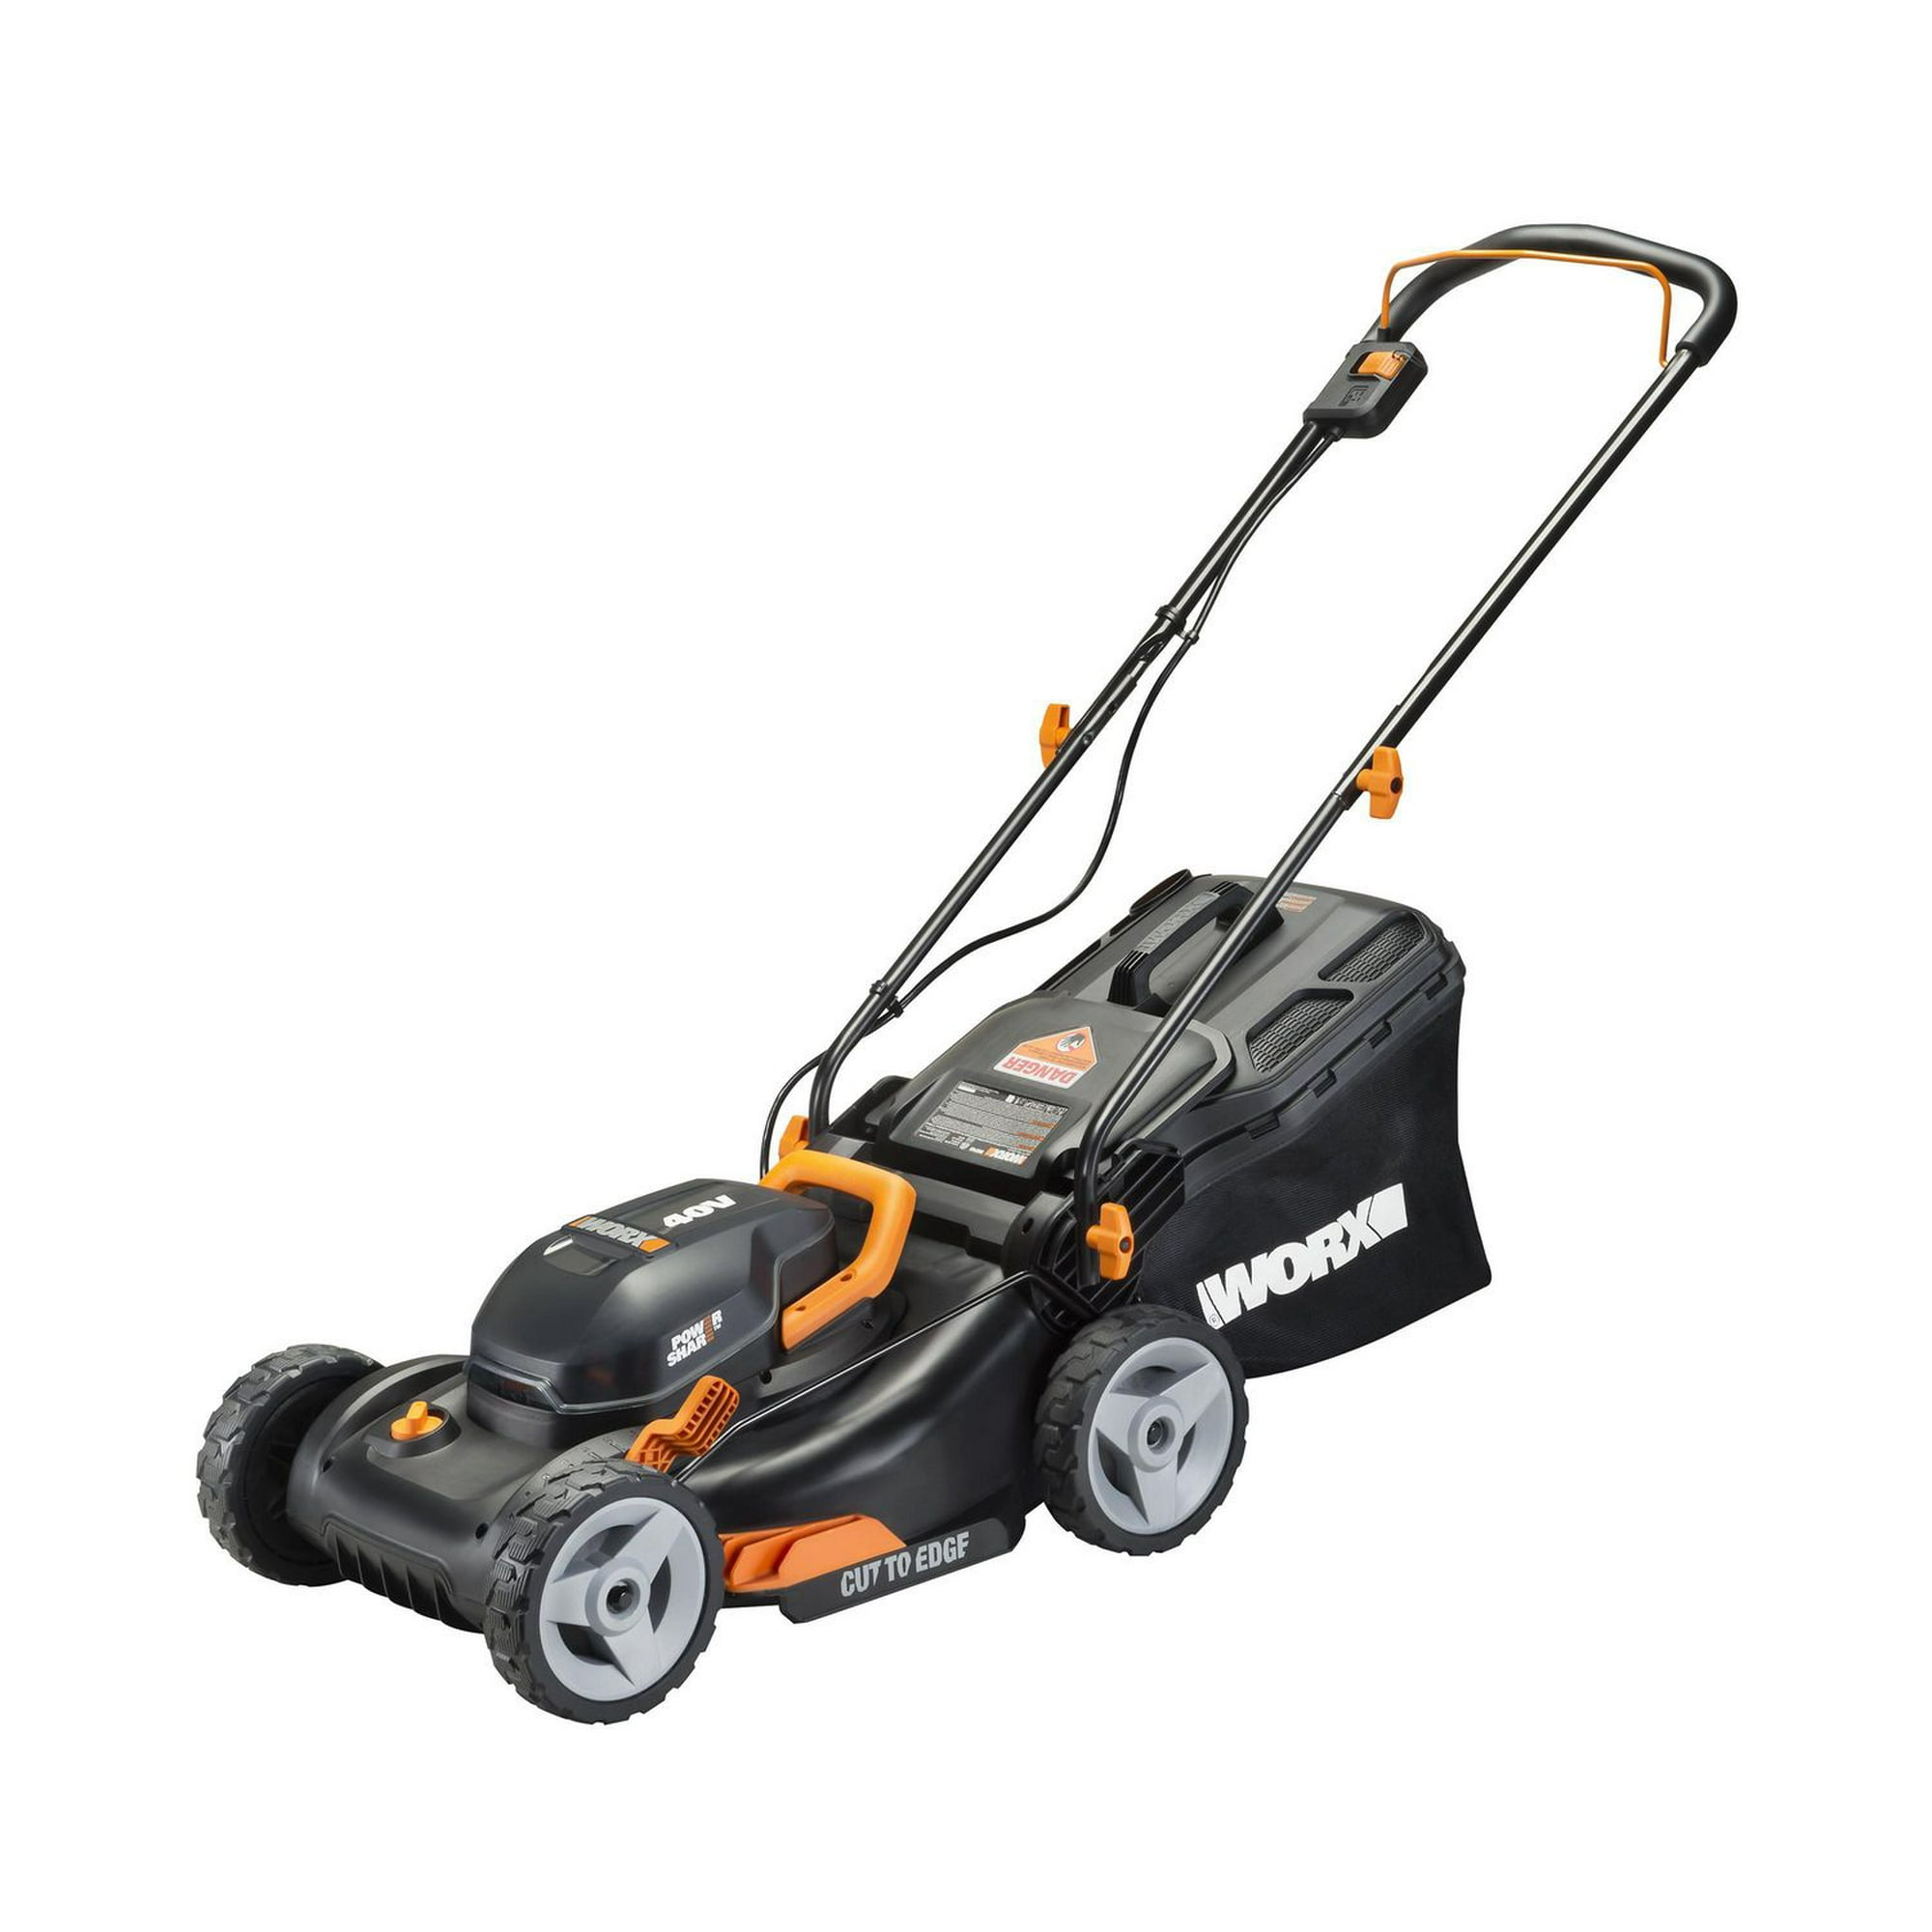 Reel Mowers: A Smart Choice for Your Lawn, Your Health, Your Budget and the  Environment